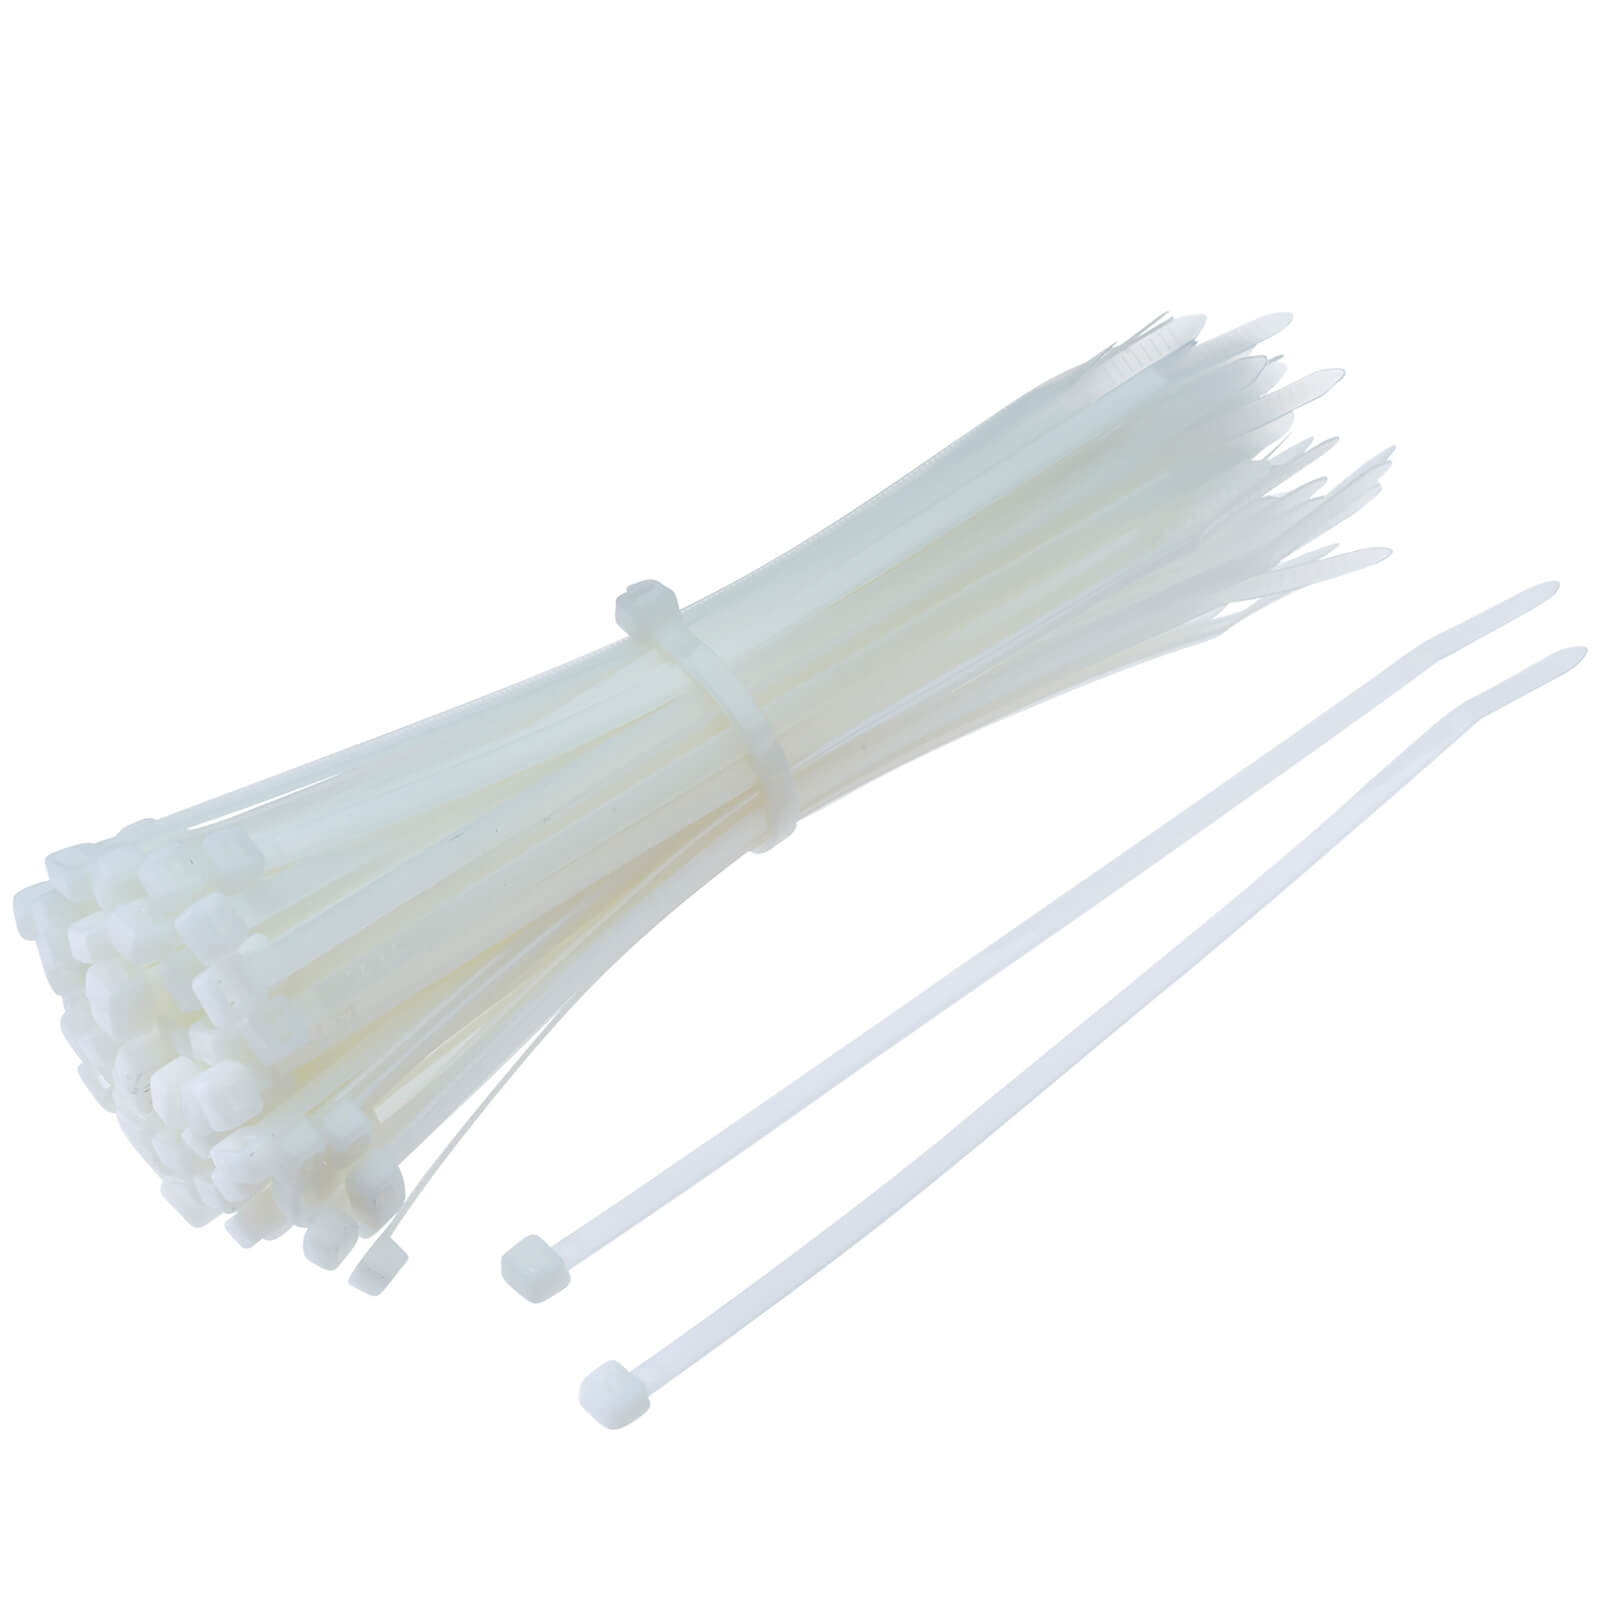 Photo of Masterplug Cable Ties 200 X 2.5mm Neutral 100 Pack